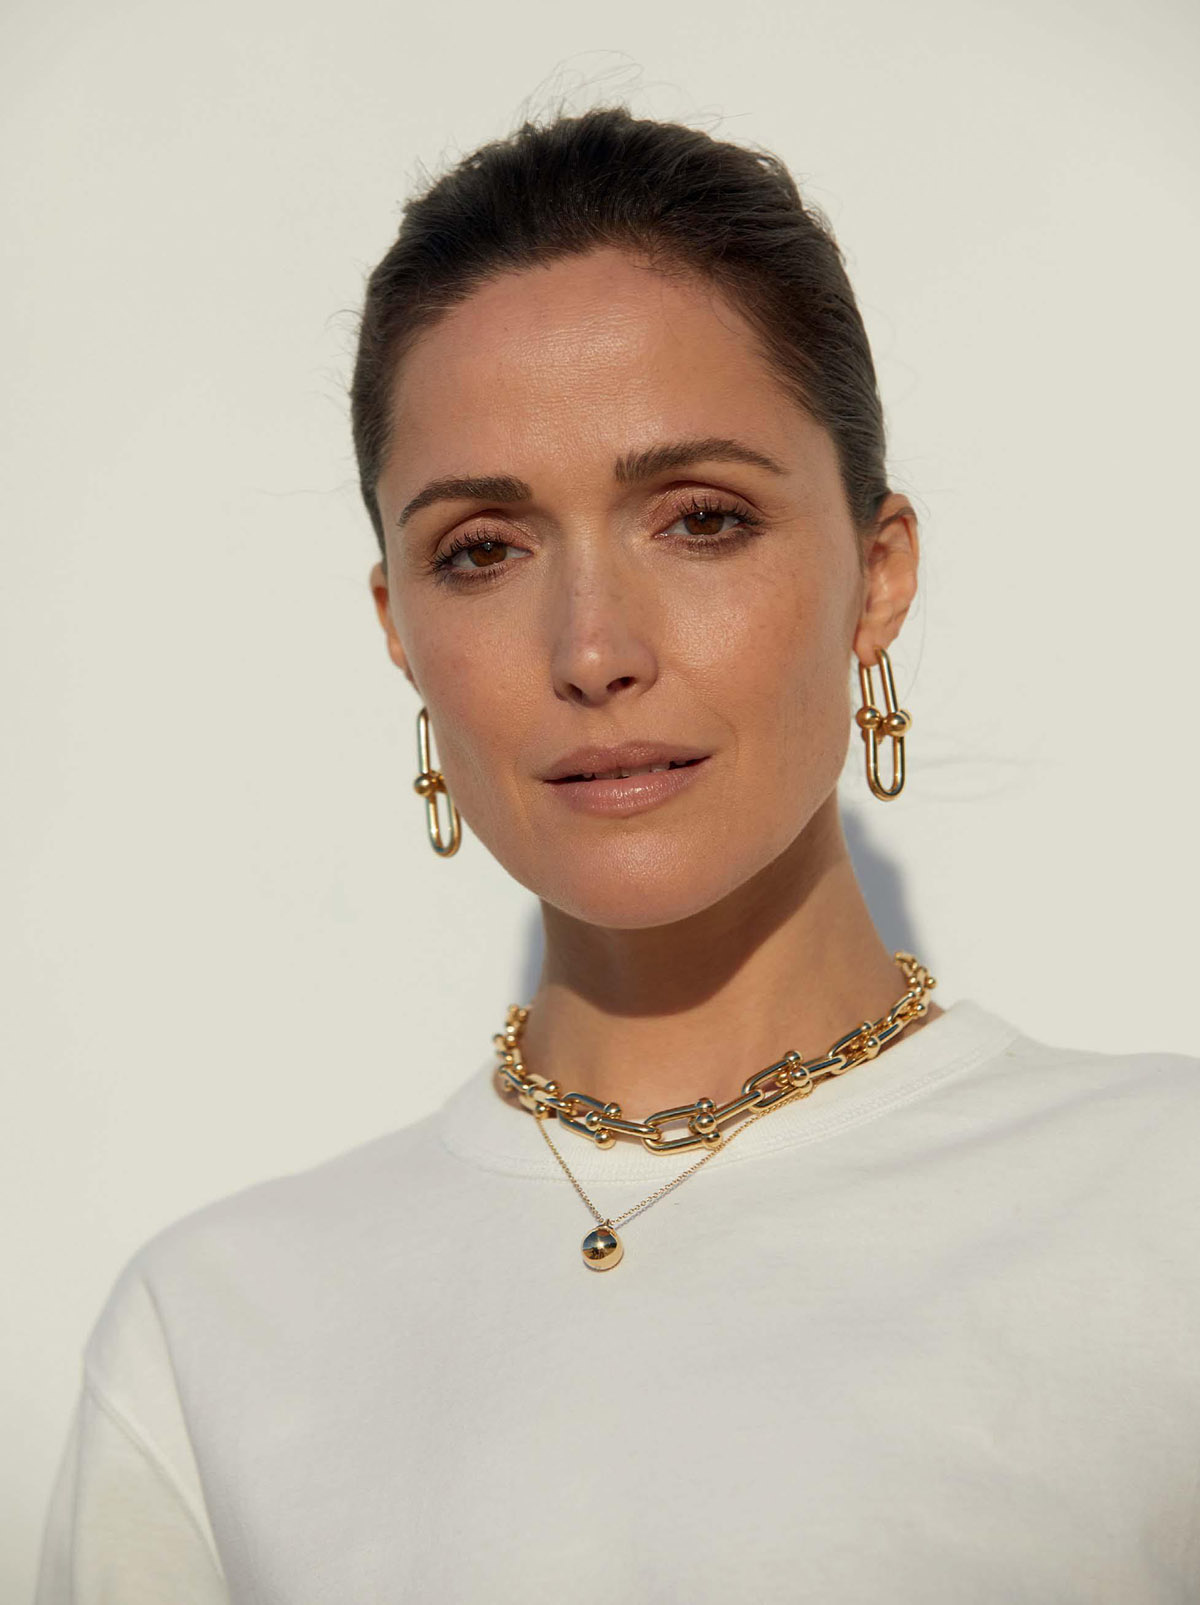 Rose Byrne covers The Sunday Times Style June 20th, 2021 by Bec Parsons